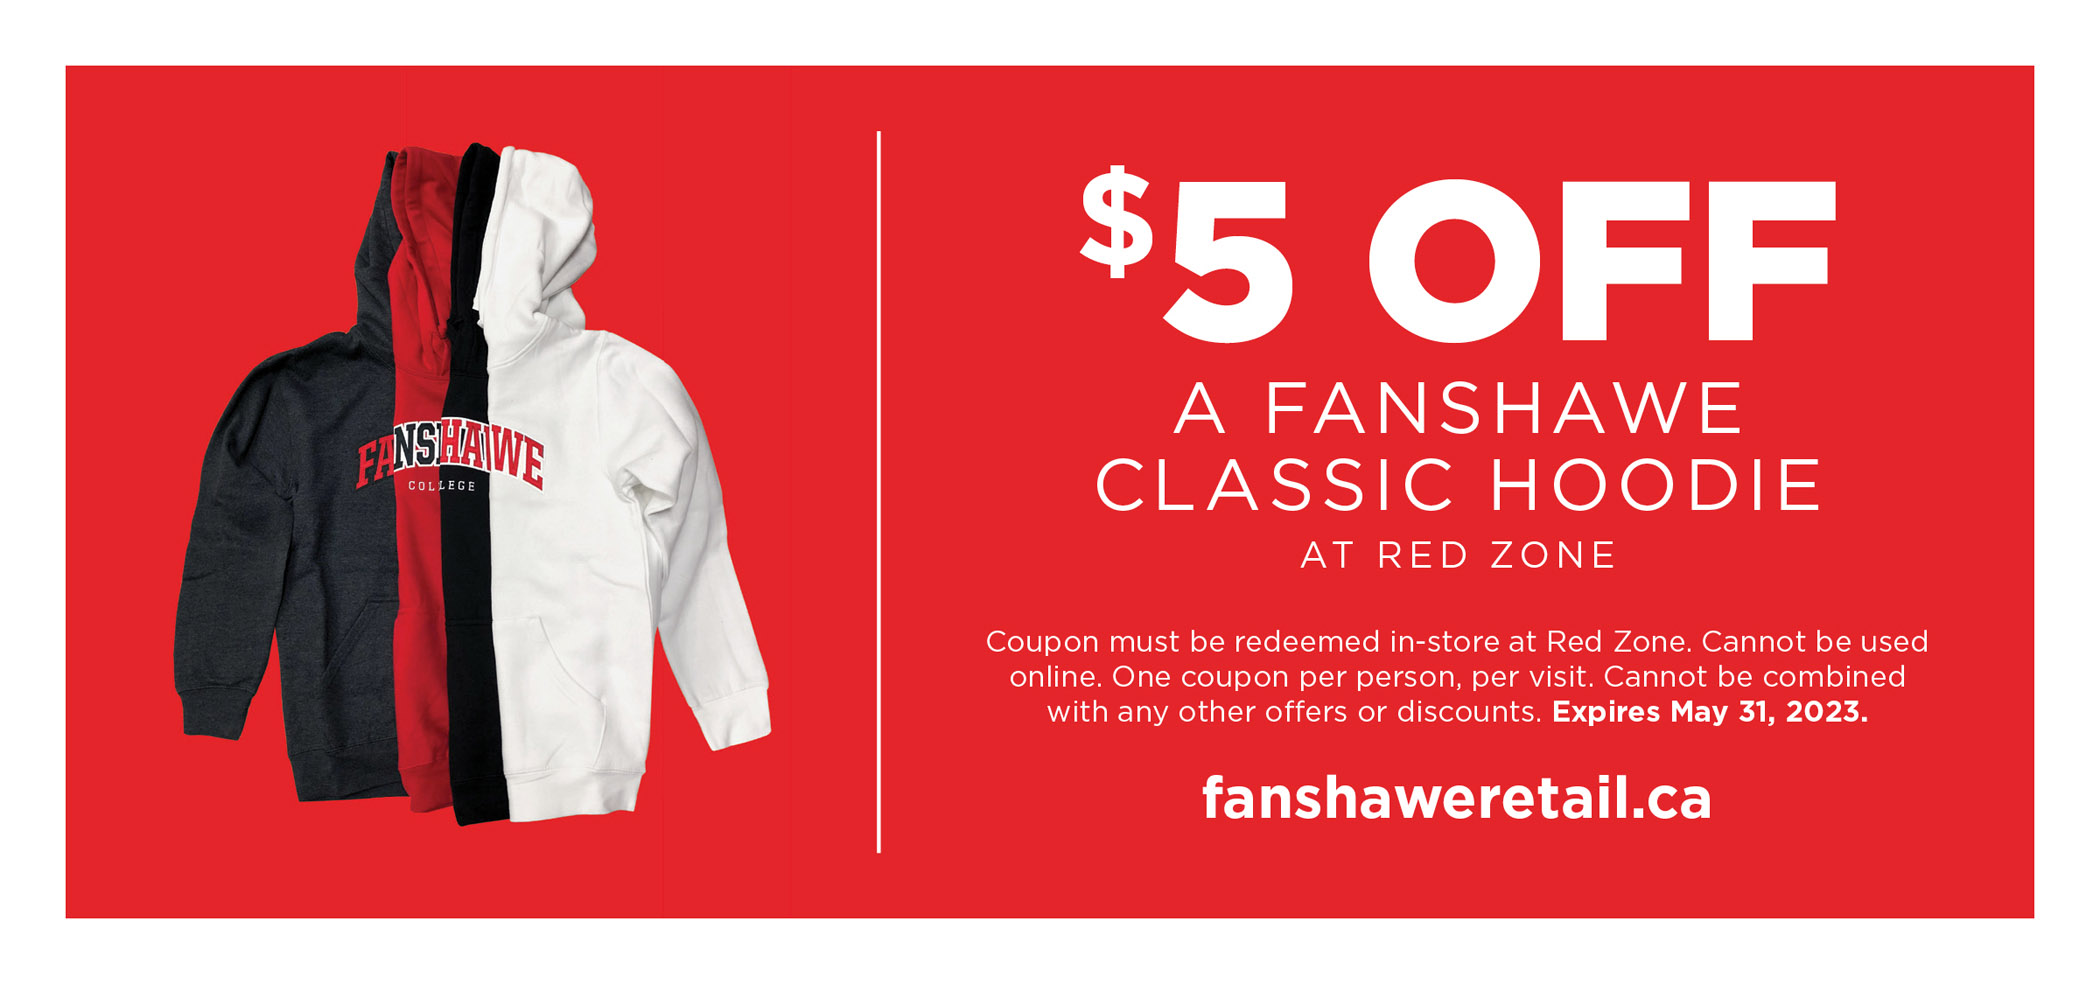 $5 off a Fanshawe classic hoodie at Red Zone